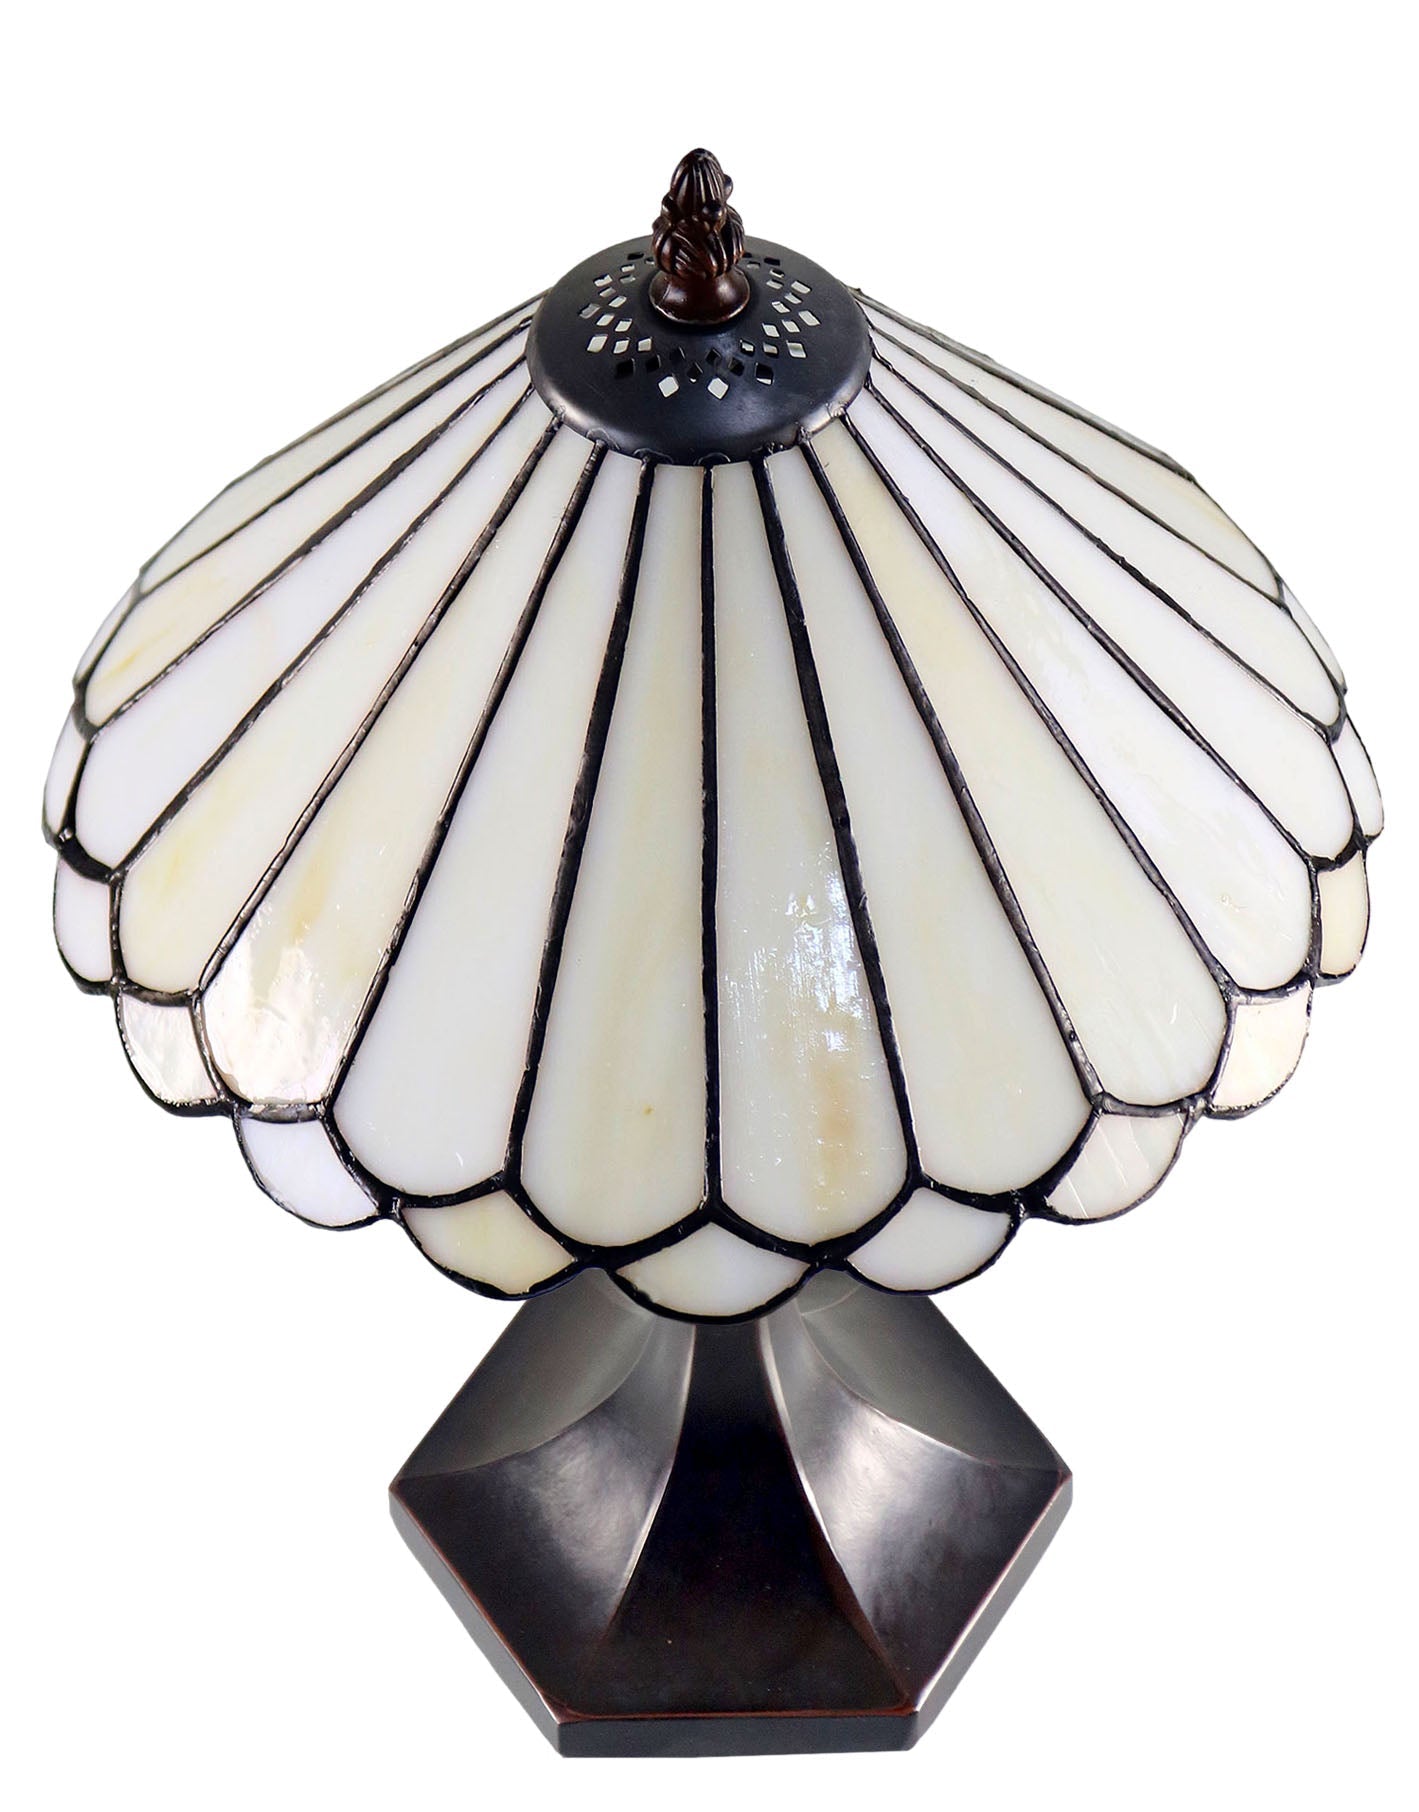 11"  Straight Panels Cone Tiffany Style Stained Glass Table Lamp*Beige